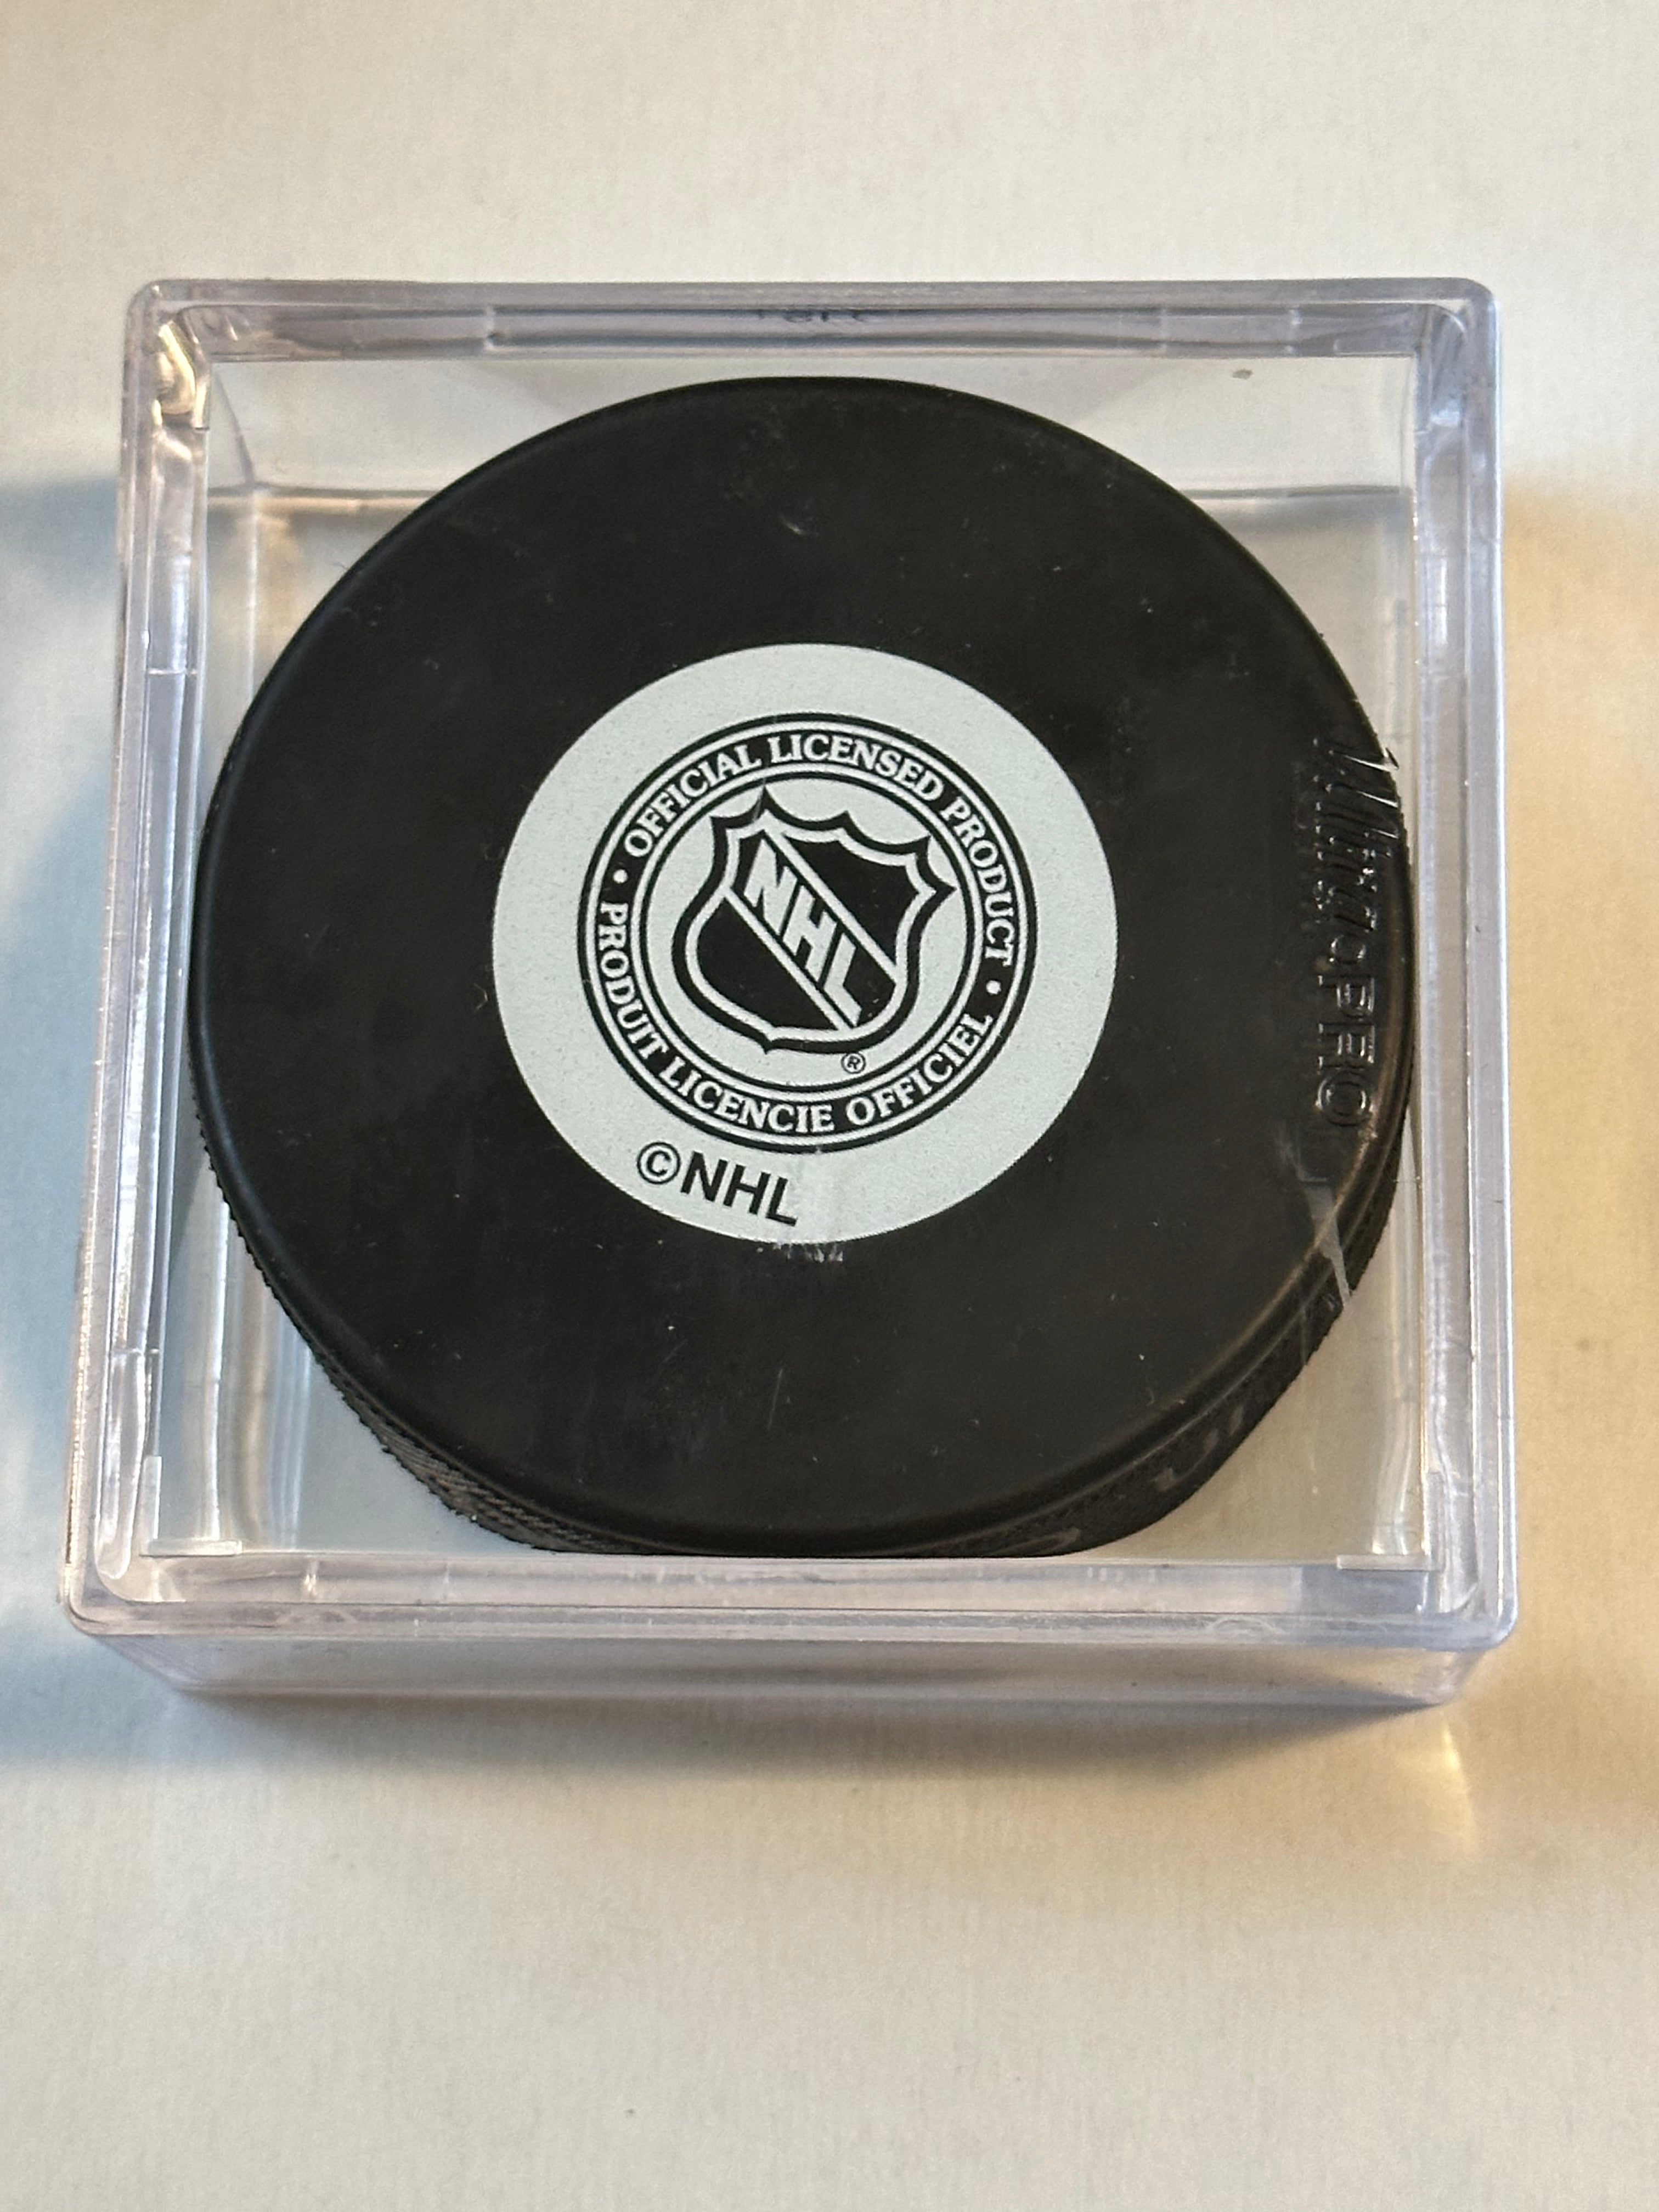 Stan Makita Chicago Black Hawks rare signed puck with holder sold with COA